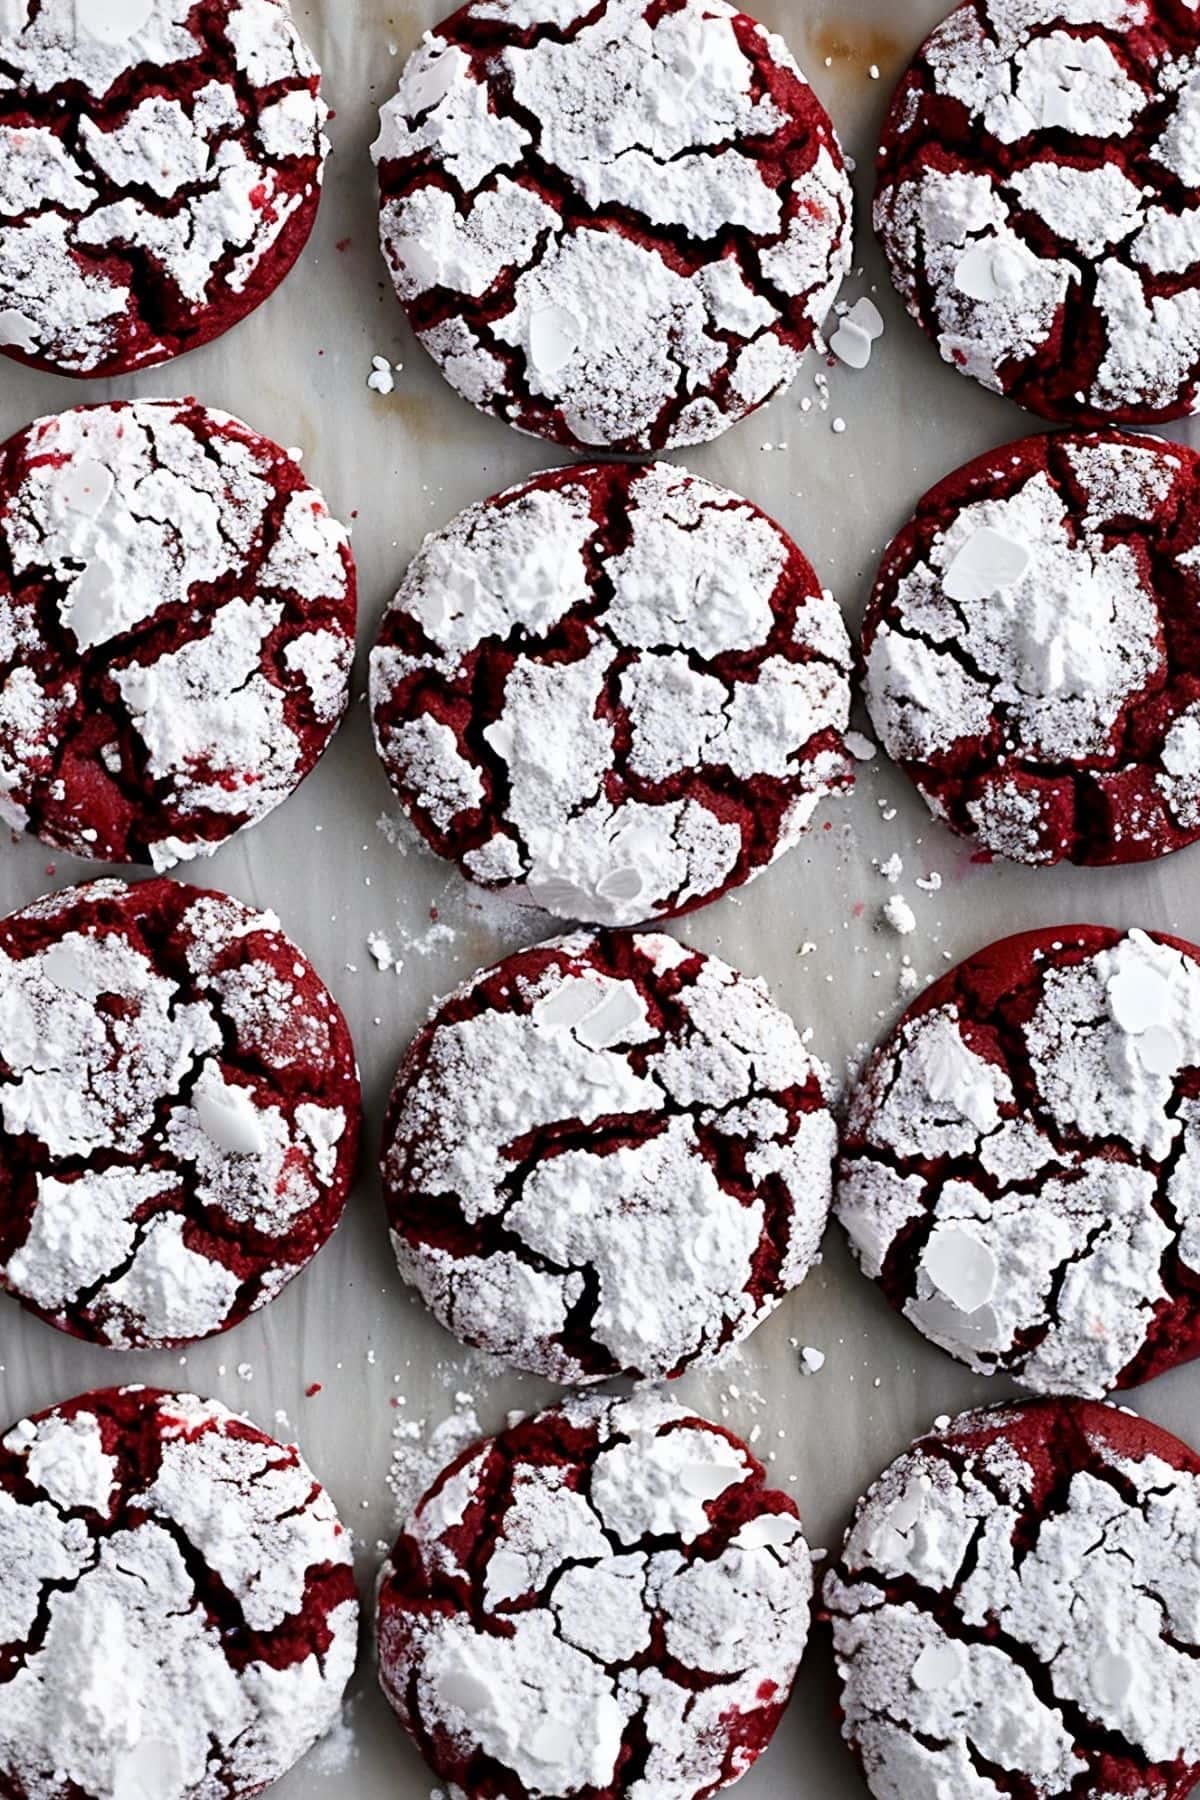 Top View of Red Velvet Crinkle Cookies with  Powdered Sugar in Even Rows on Parchment Paper